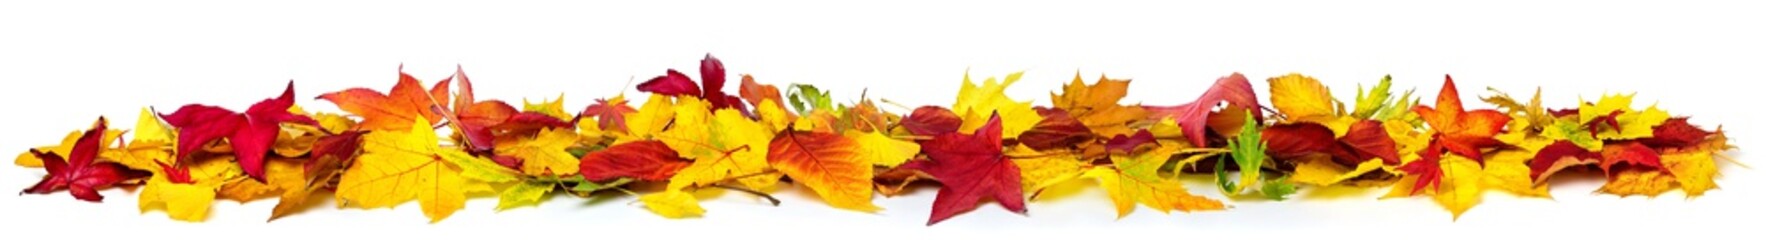 Colorful autumn leaves on the ground as a border, extra wide panorama format with vibrant colors,...